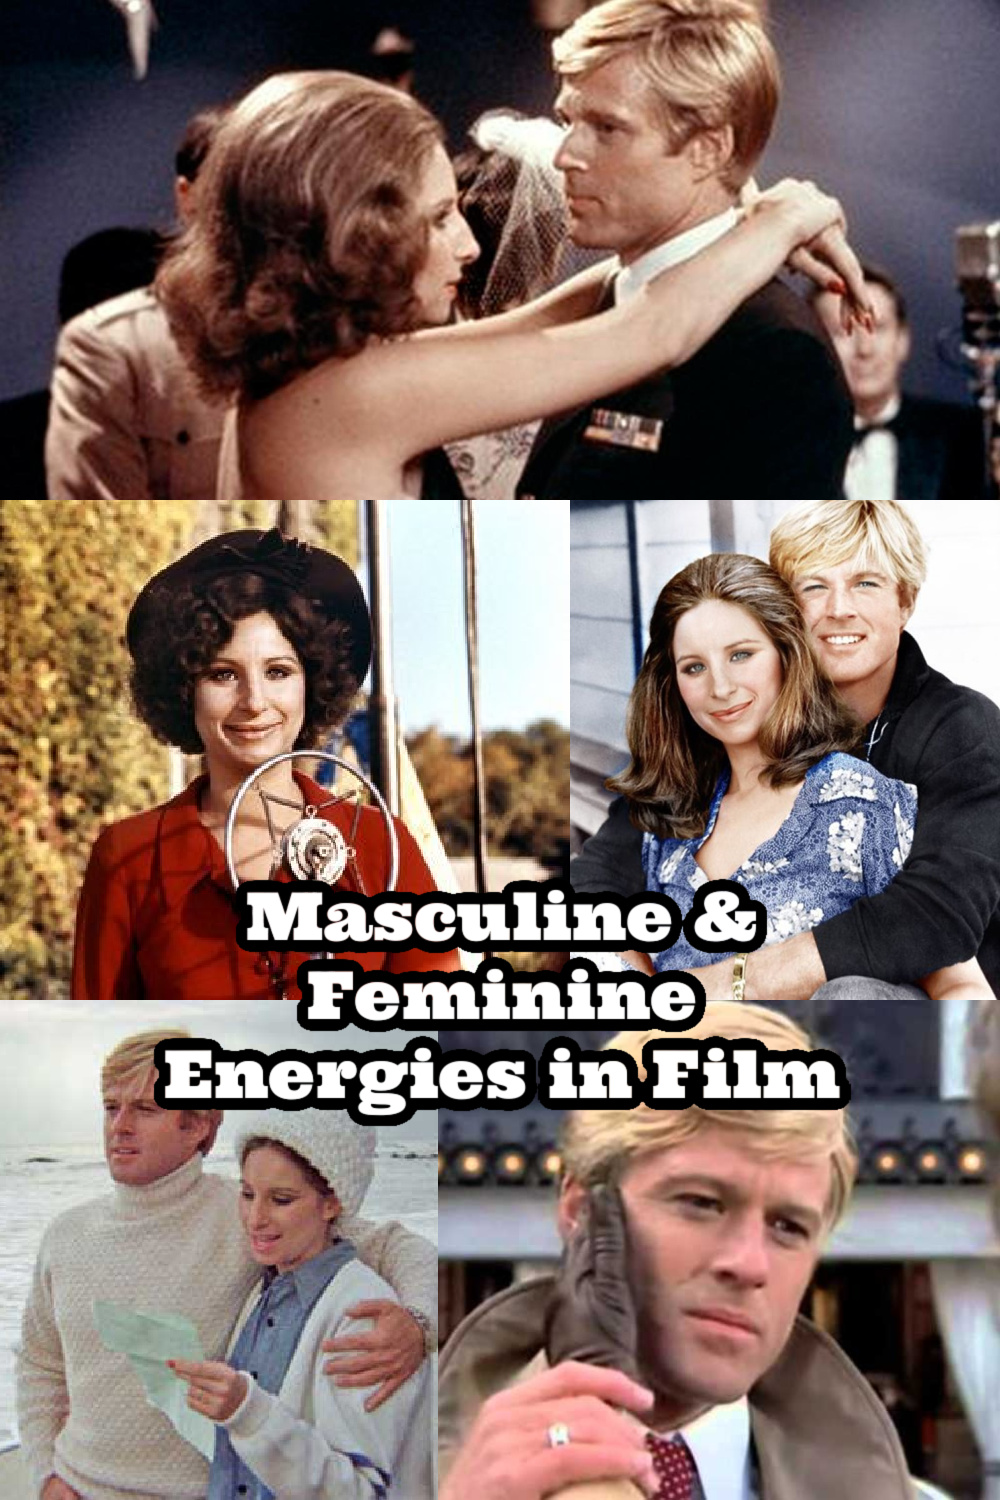 the way we were film review, wounded masculine energy, wounded masculine energy in a female, wounded feminine energy, wounded feminine energy in a man, feminine leadership vs masculine leadership, masculine vs feminine leadership, why women try to control men, toxic masculinity in women, wounded masculine energy in a woman, feminine and masculine energy in relationships, understanding masculine and feminine energy, sexual polarity in relationships, sexual polarity, sexual polarity masculine feminine, law of polarity in relationships, how to create polarity in relationships, masculine and feminine examples, Everyday starlet, sarah blodgett,